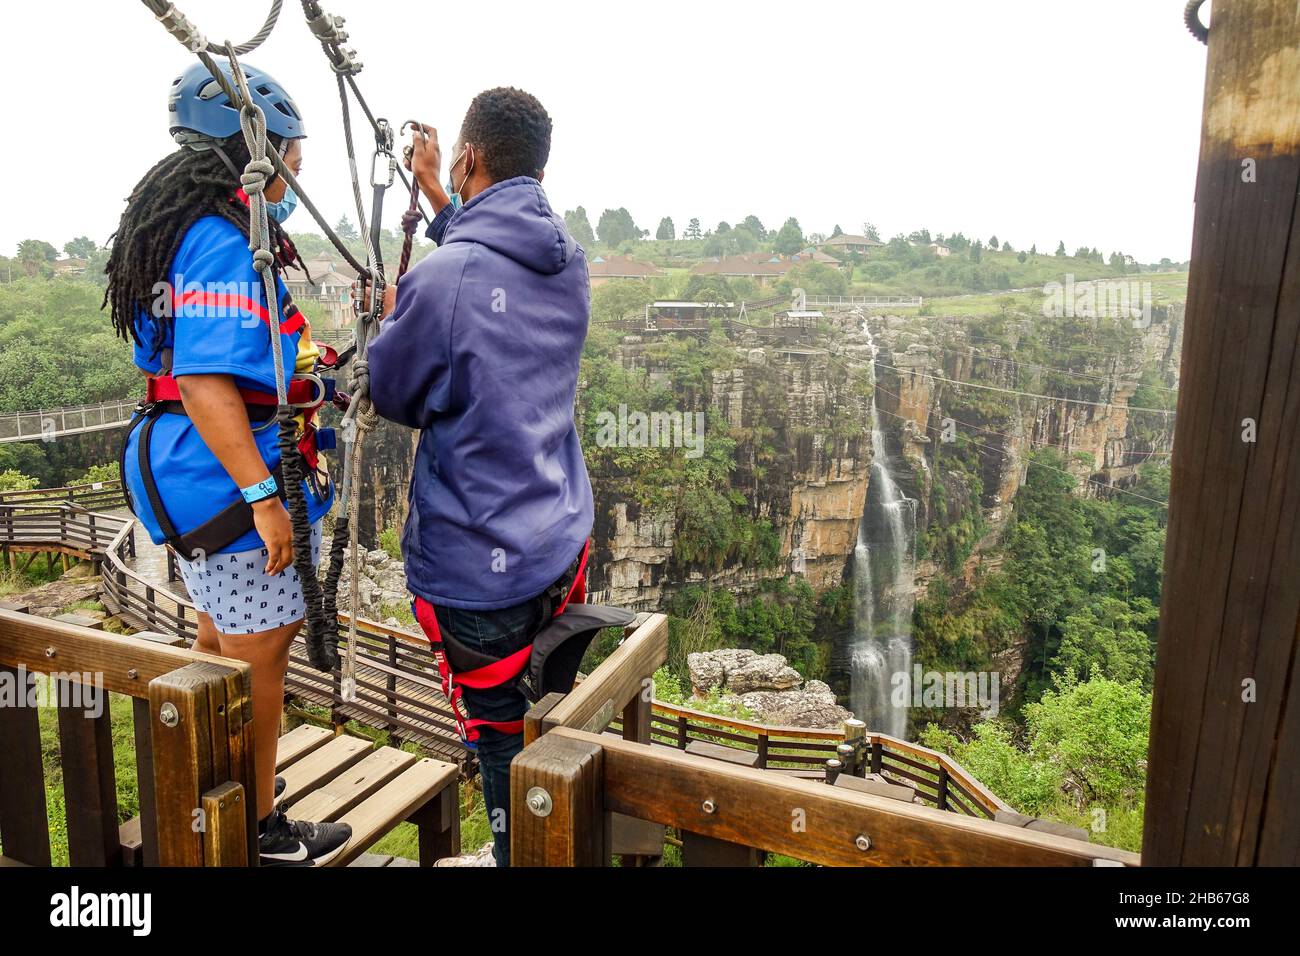 Black woman about to glide along a zipline at Graskop gorge, South Africa Stock Photo